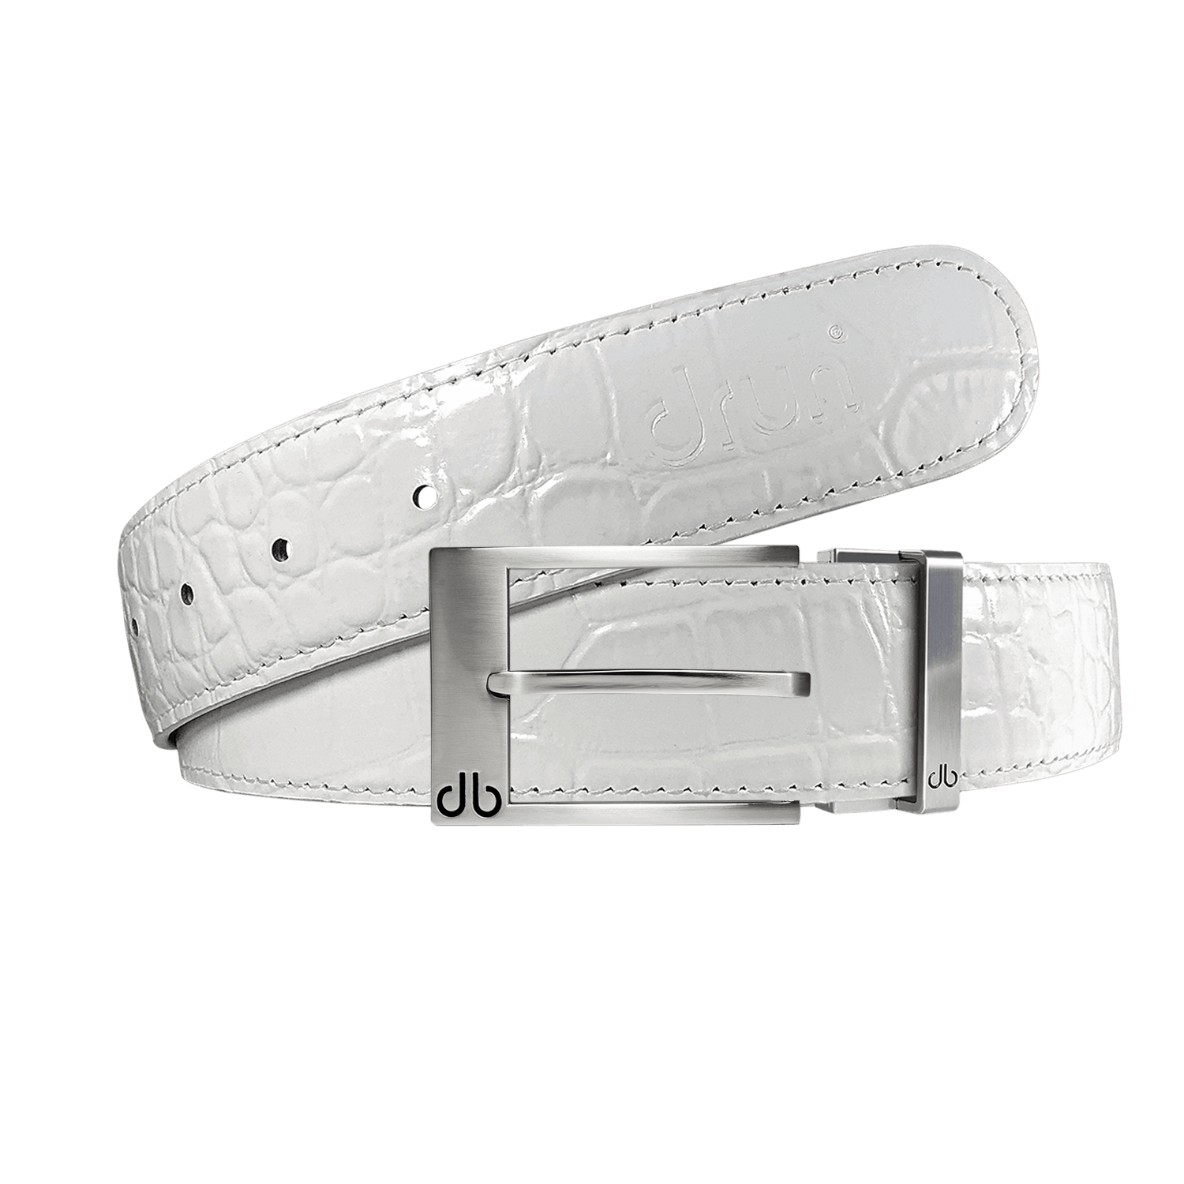 White Crocodile leather strap with Classic silver prong buckle